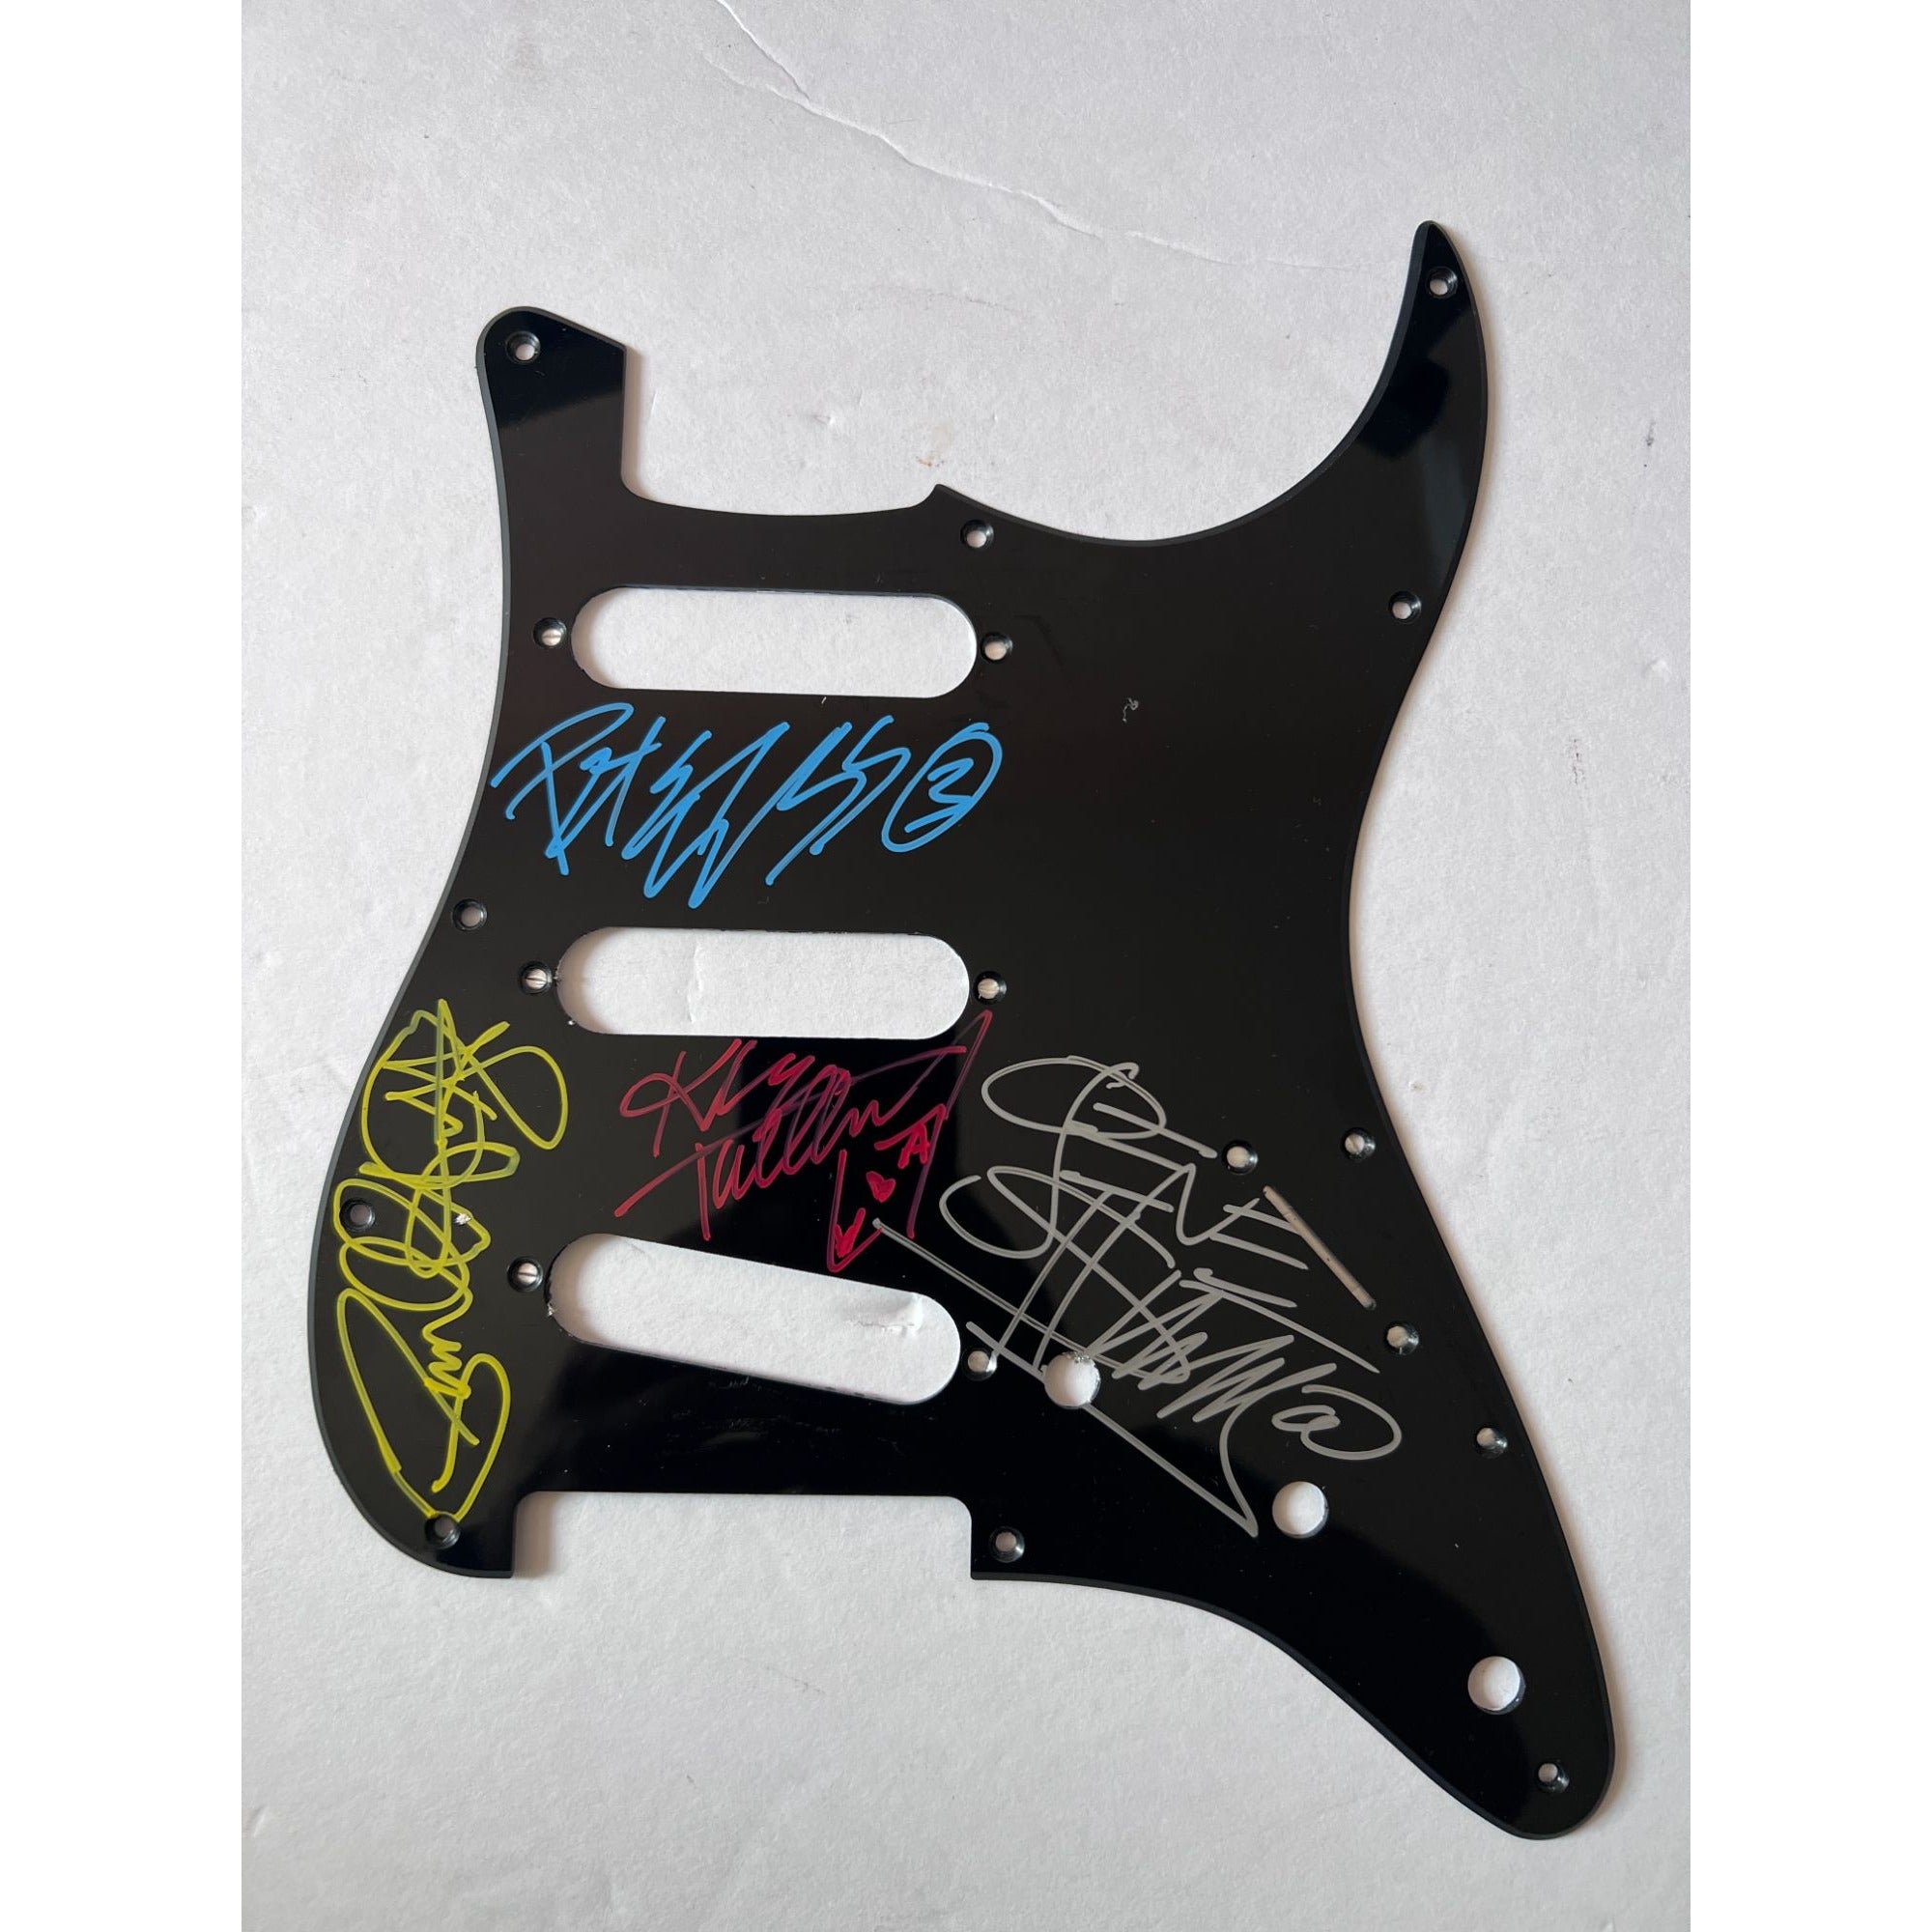 Kiss Gene Simmons Paul Stanley Peter Criss Ace Frehley   Stratocaster electric pickguard signed with proof